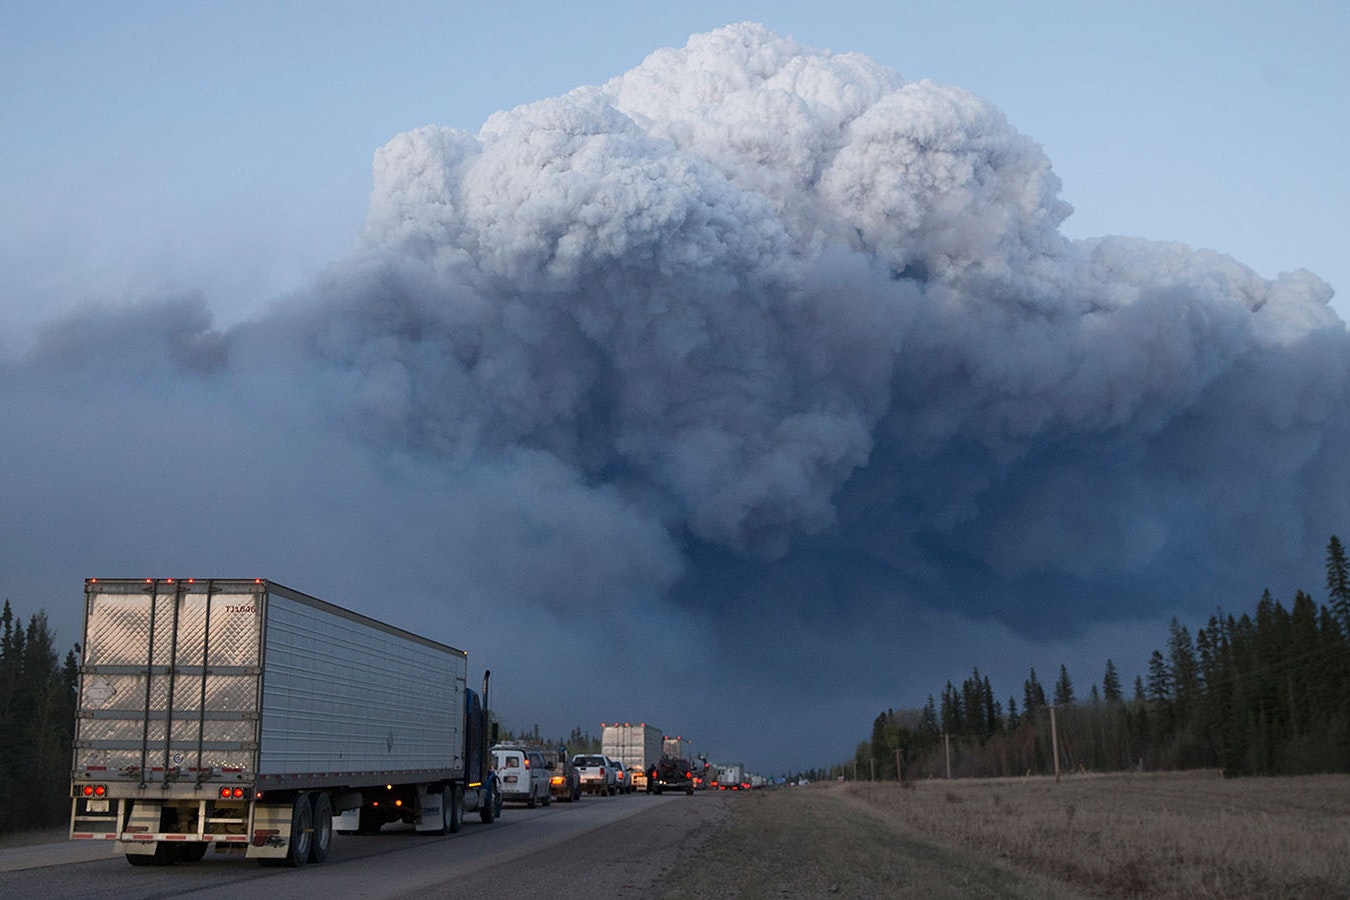 Drivers wait for clearance to take firefighting supplies into town outside of Fort McMurray, Alberta. Wildfires burning out of control forced the evacuation of more than 80,000 residents from the town.